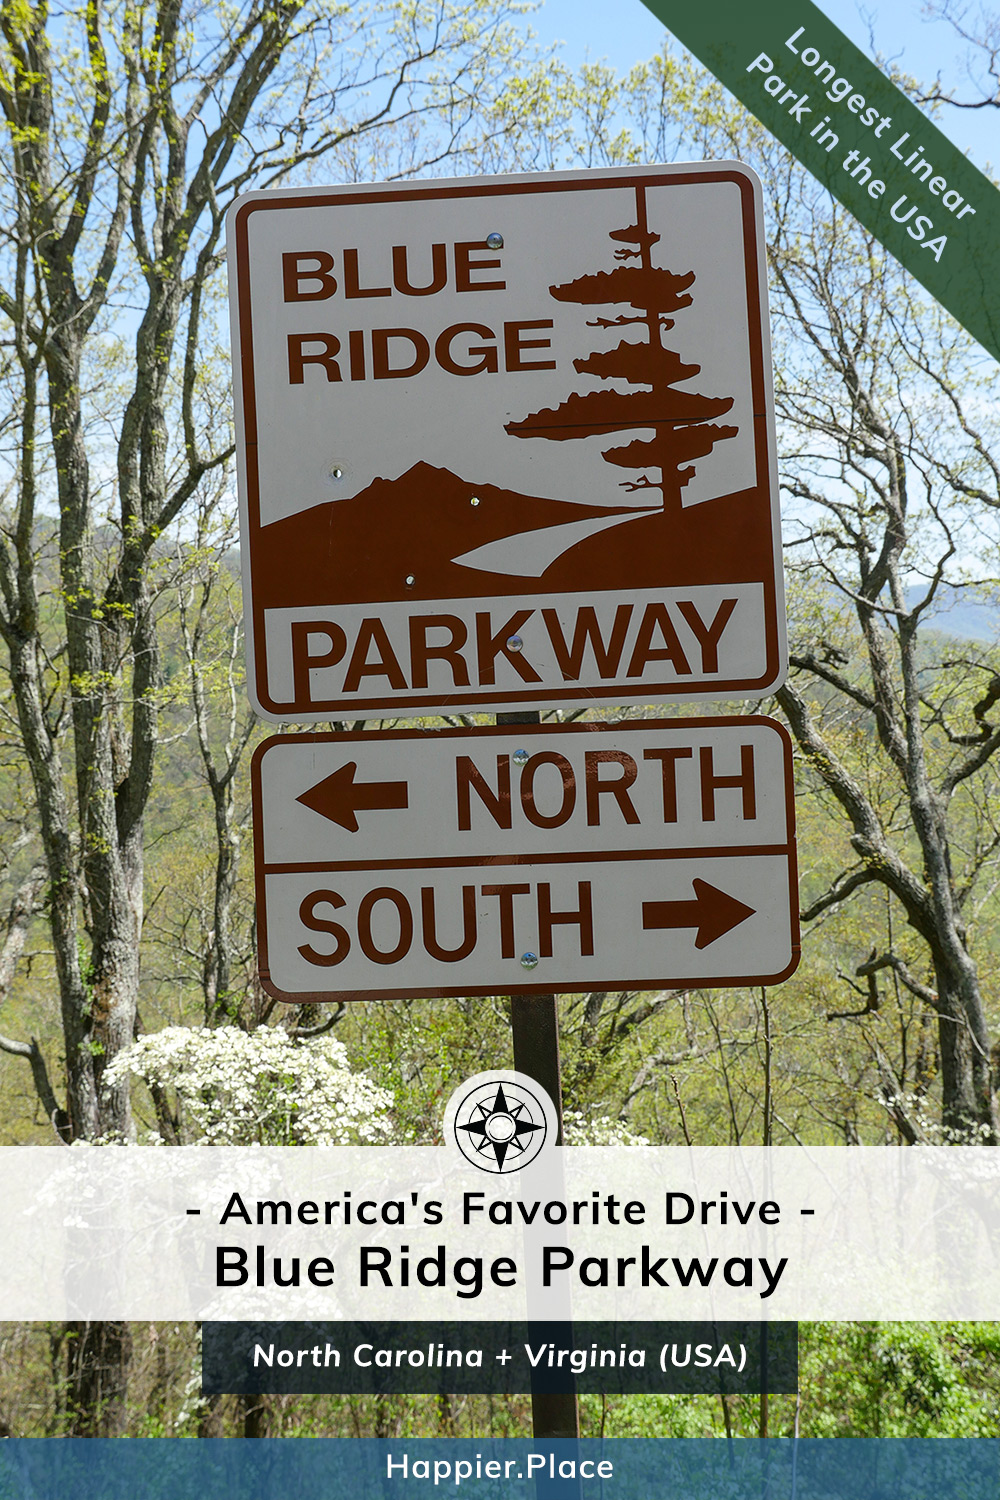 Iconic Blue Ridge Parkway sign, America's Favorite Drive and Longest Linear Park in the USA, Happier Place, Virginia, North Carolina